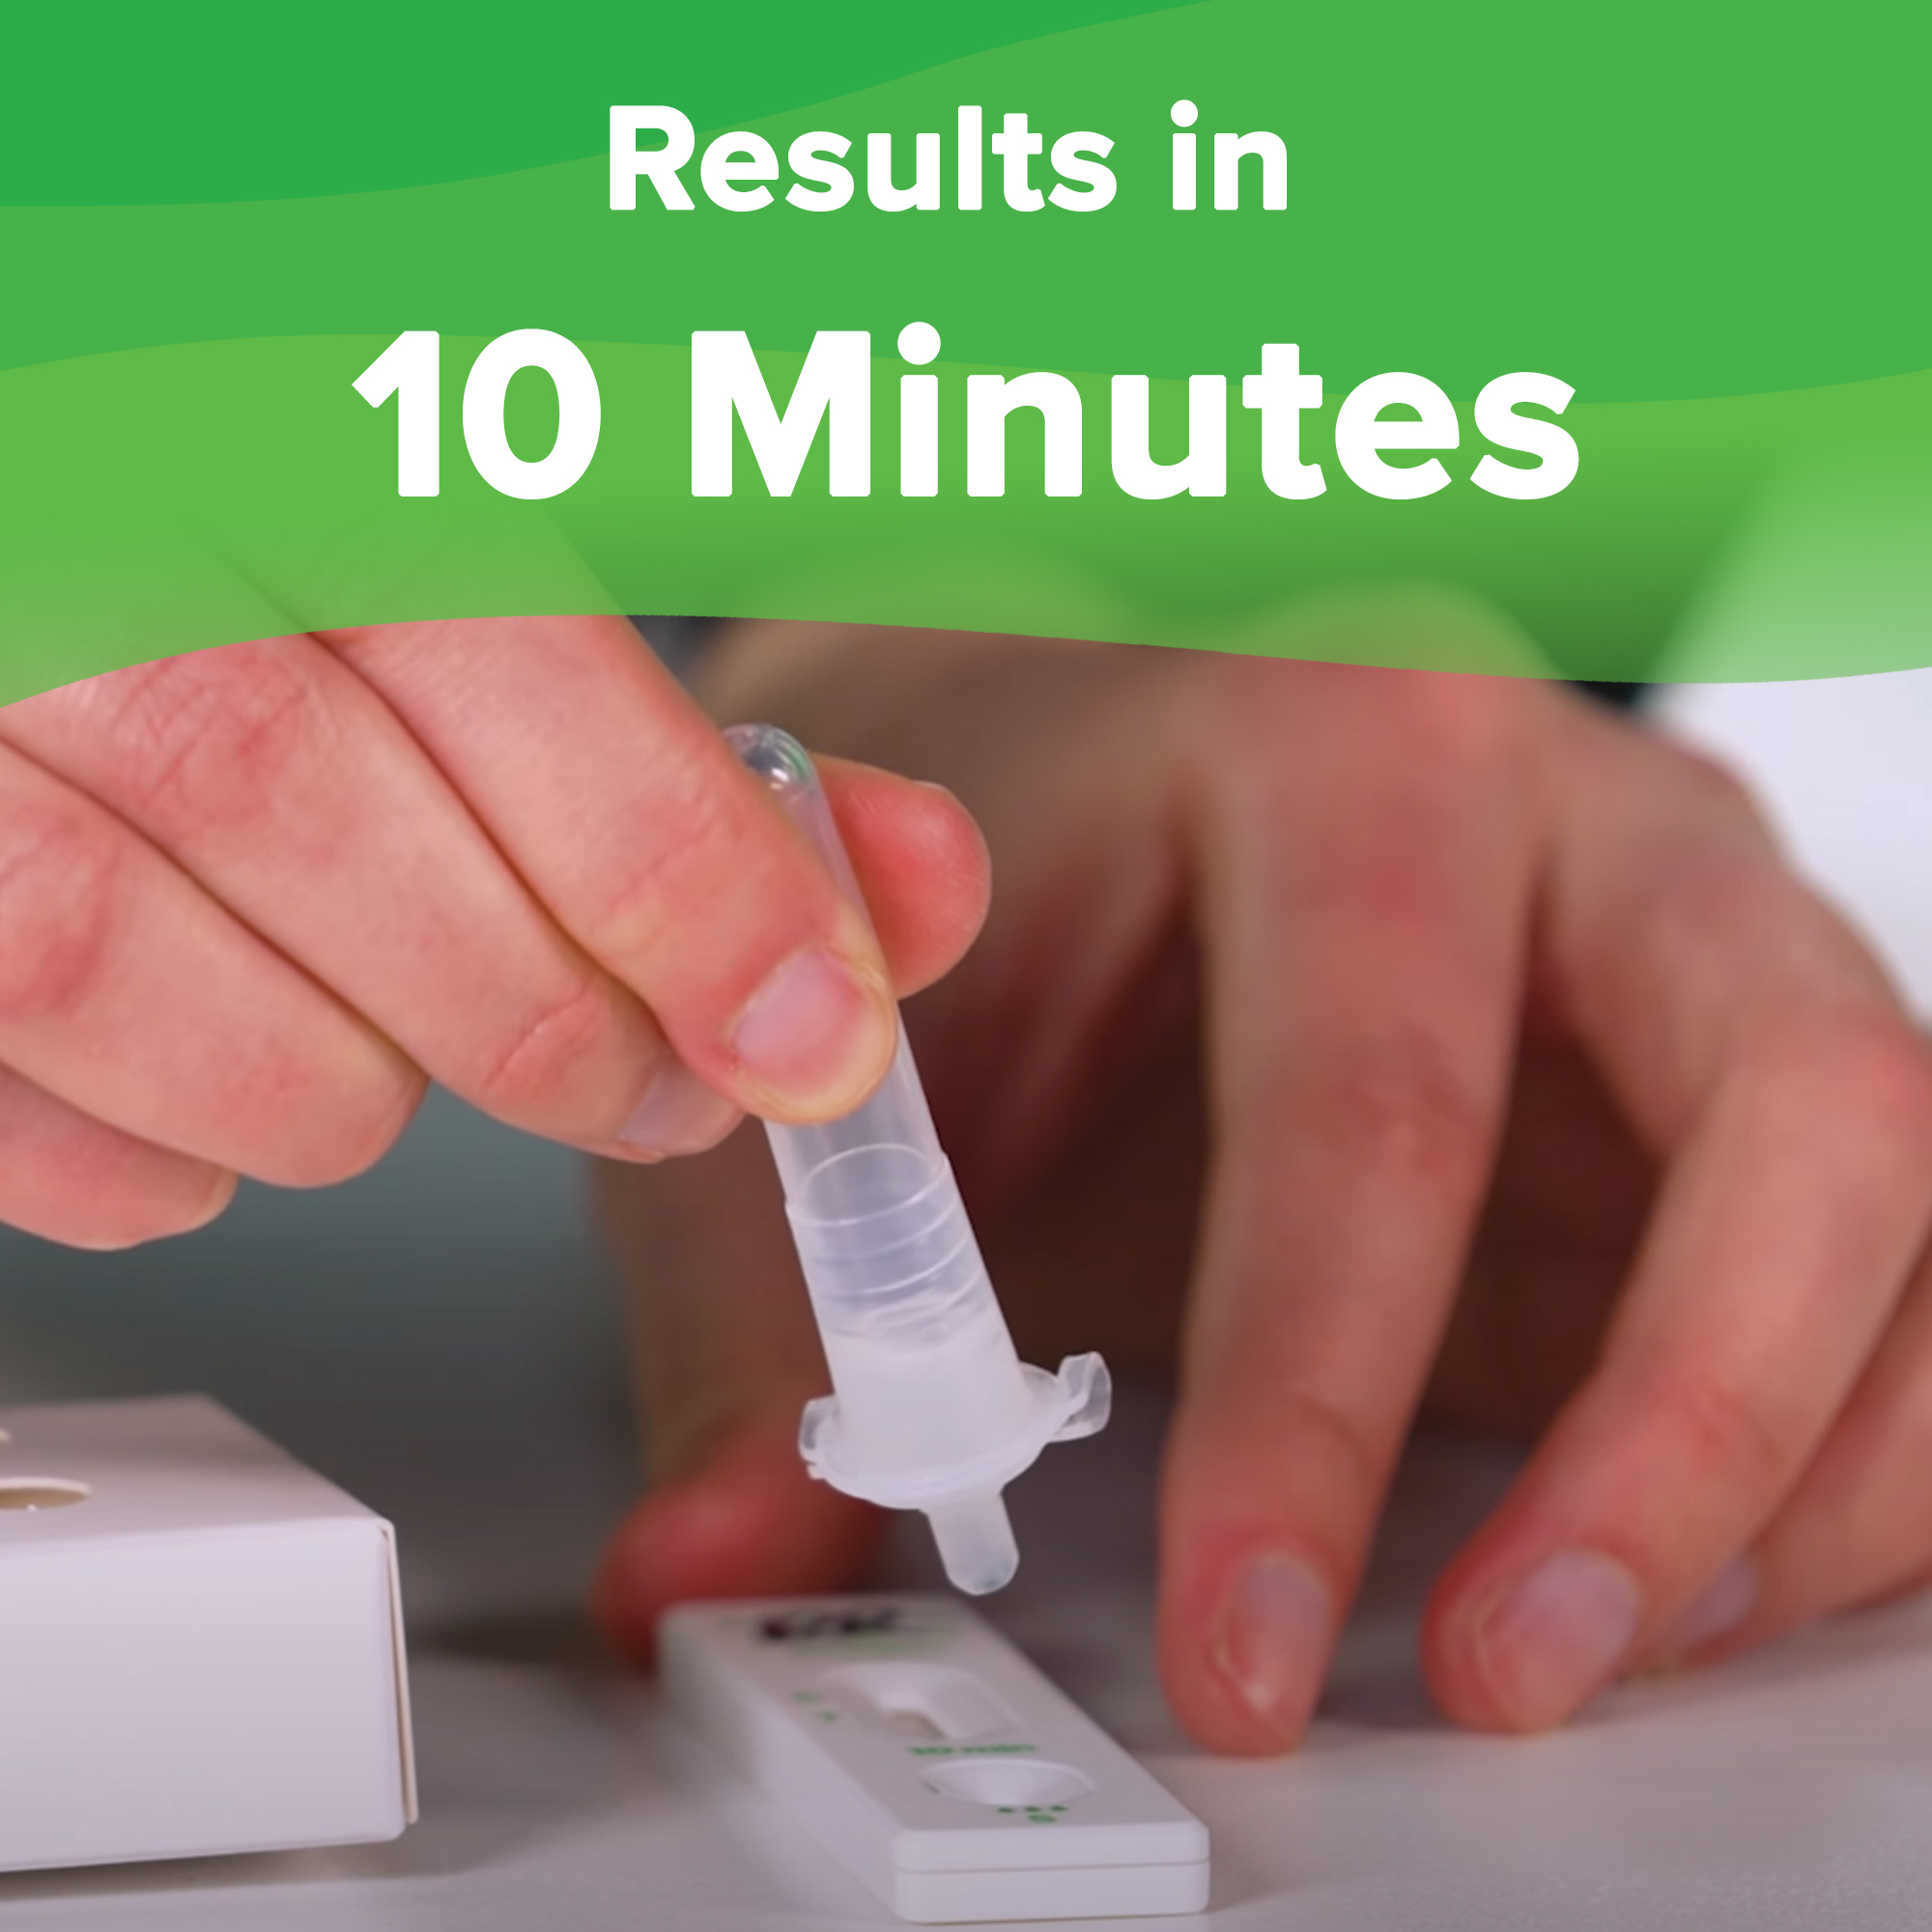 Results in 10 Minutes